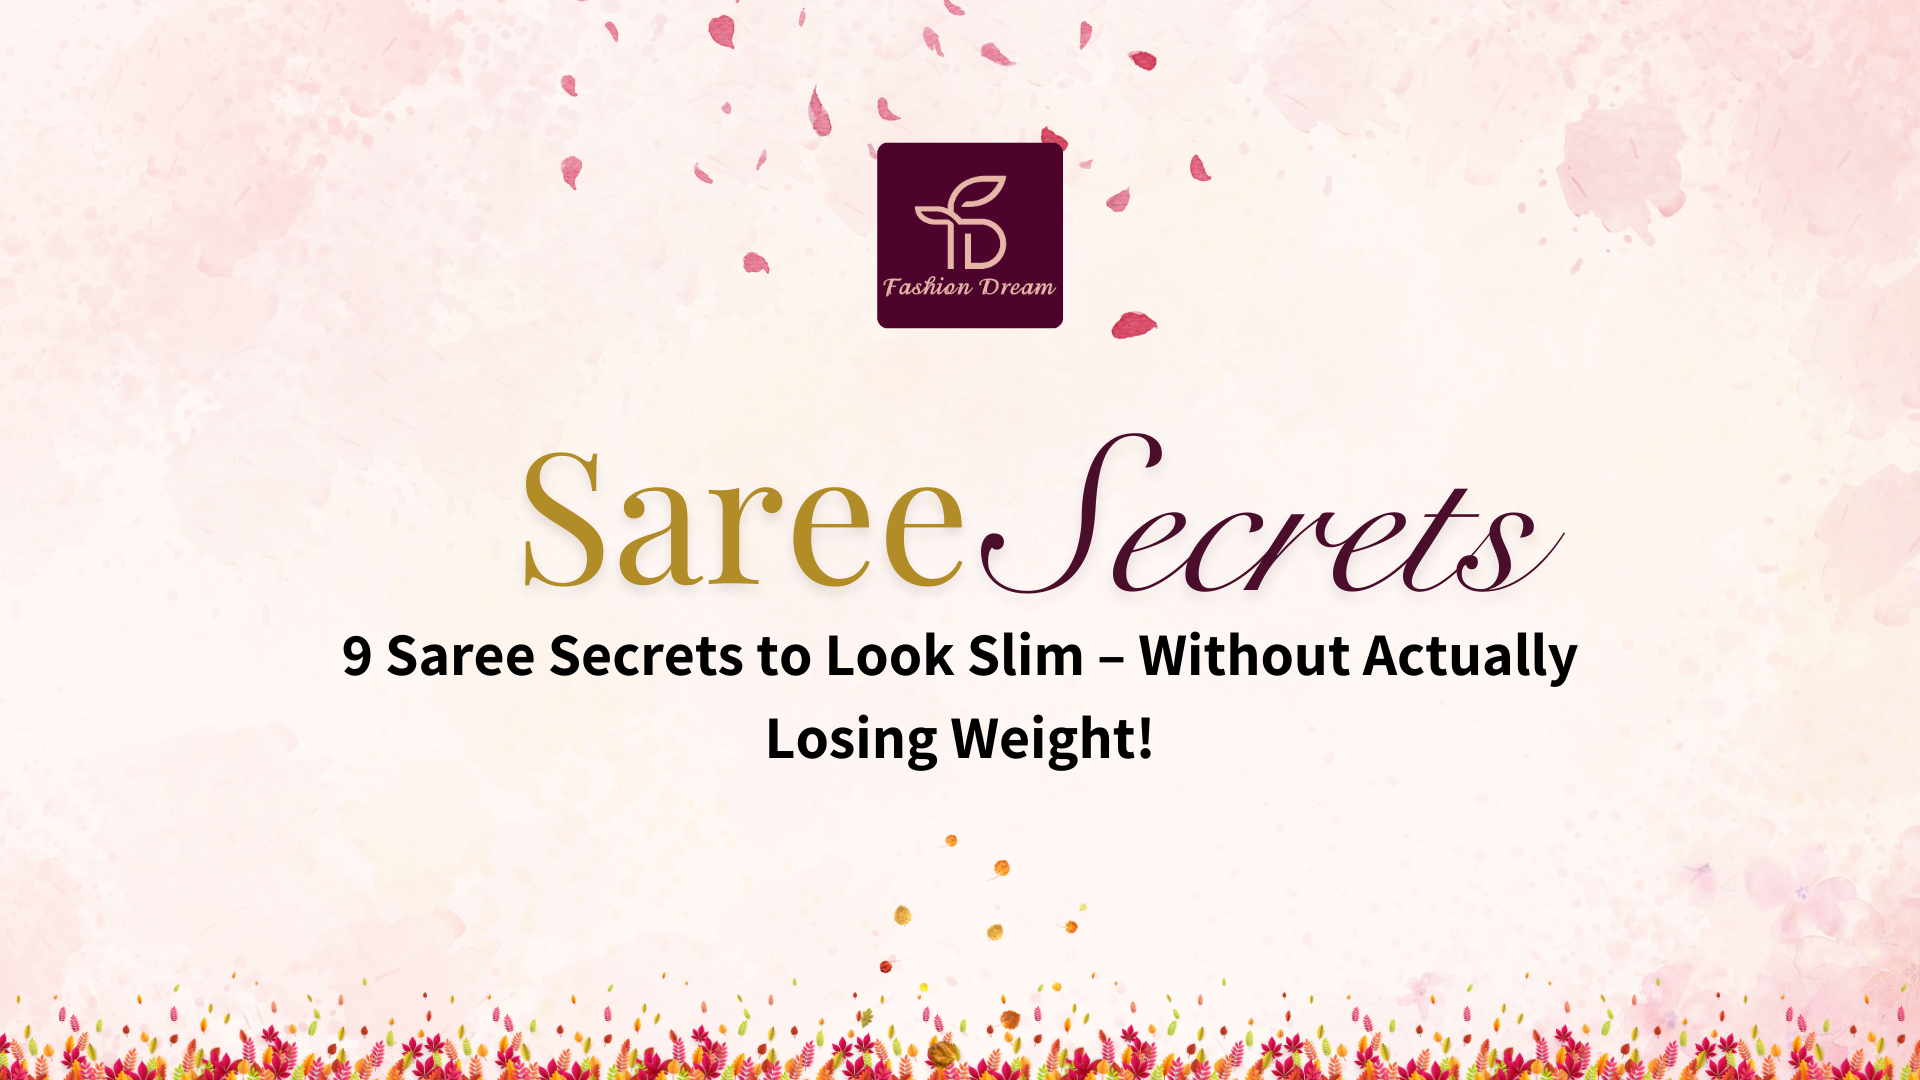 http://fashiondream.co.in/cdn/shop/articles/9_Saree_Secrets_to_Look_Slim_Without_Actually_Losing_Weight.png?v=1707296819